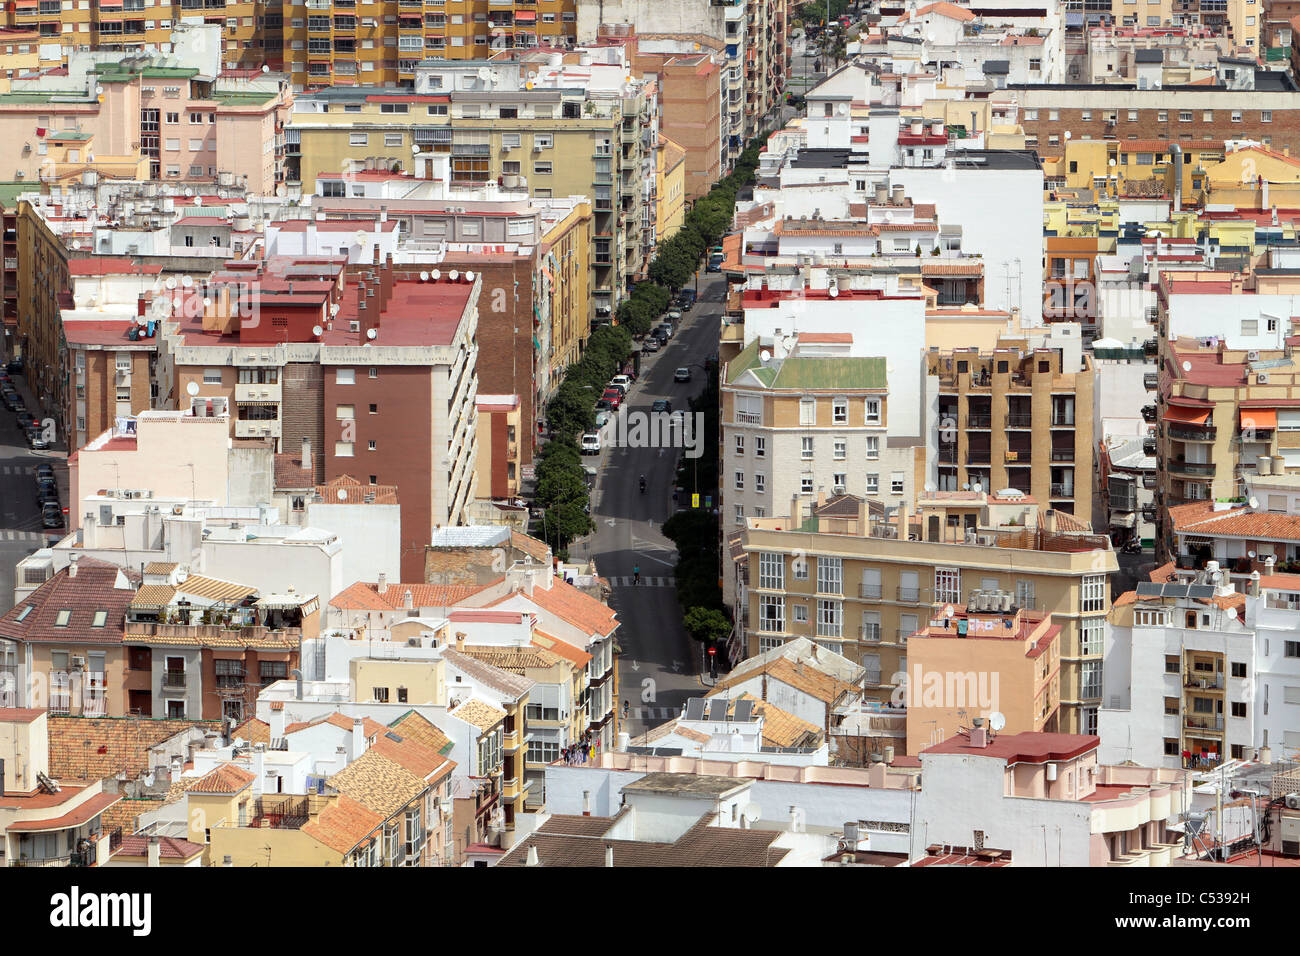 City of Malaga Spain the Mediterranean Sea port showing downtown with tree lined street, and high rise apartments,congested area Stock Photo